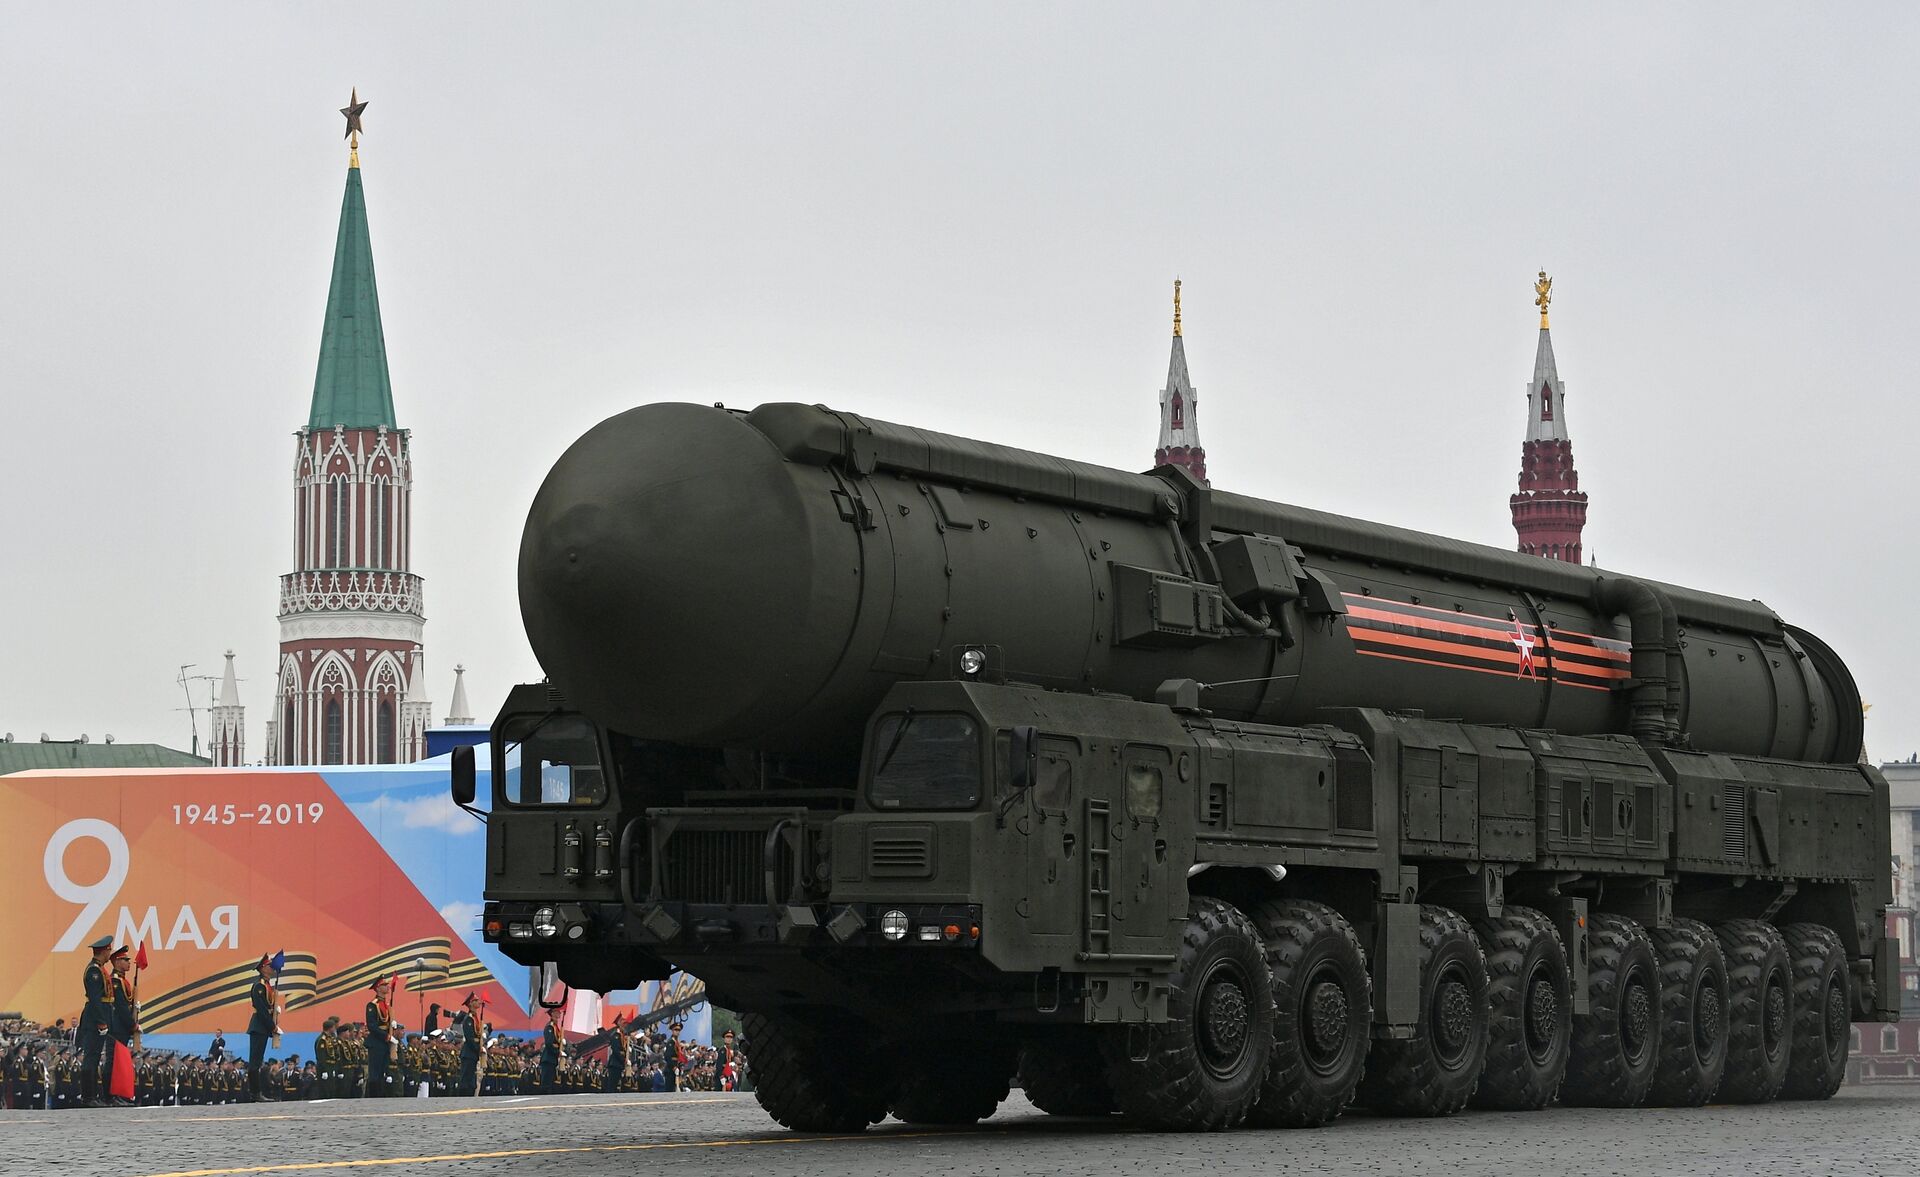 A Russian RS-24 Yars intercontinental ballistic missile system rolls down the Red Square during the Victory Day parade in Moscow on 9 May, 2019 - Sputnik International, 1920, 23.02.2023